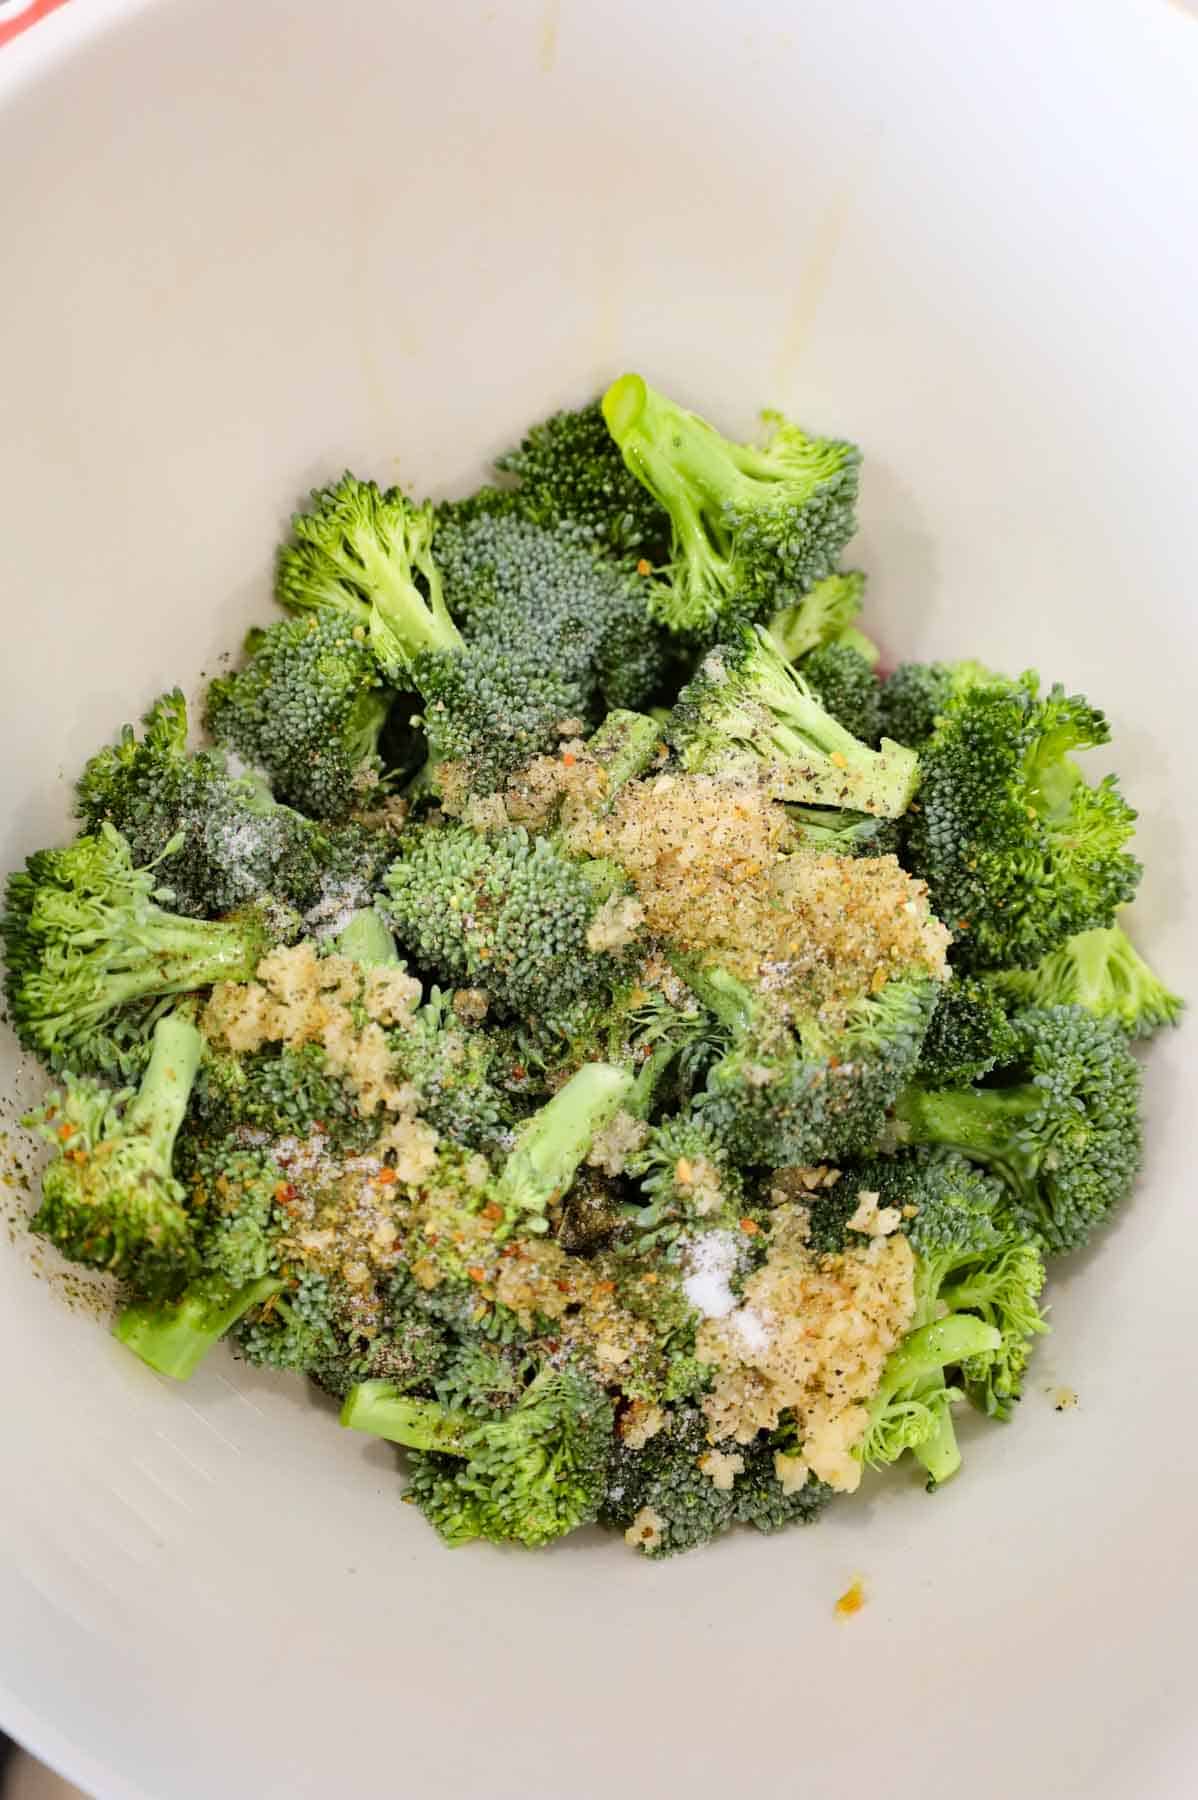 minced garlic, spices and olive oil on top of broccoli florets in a mixing bowl